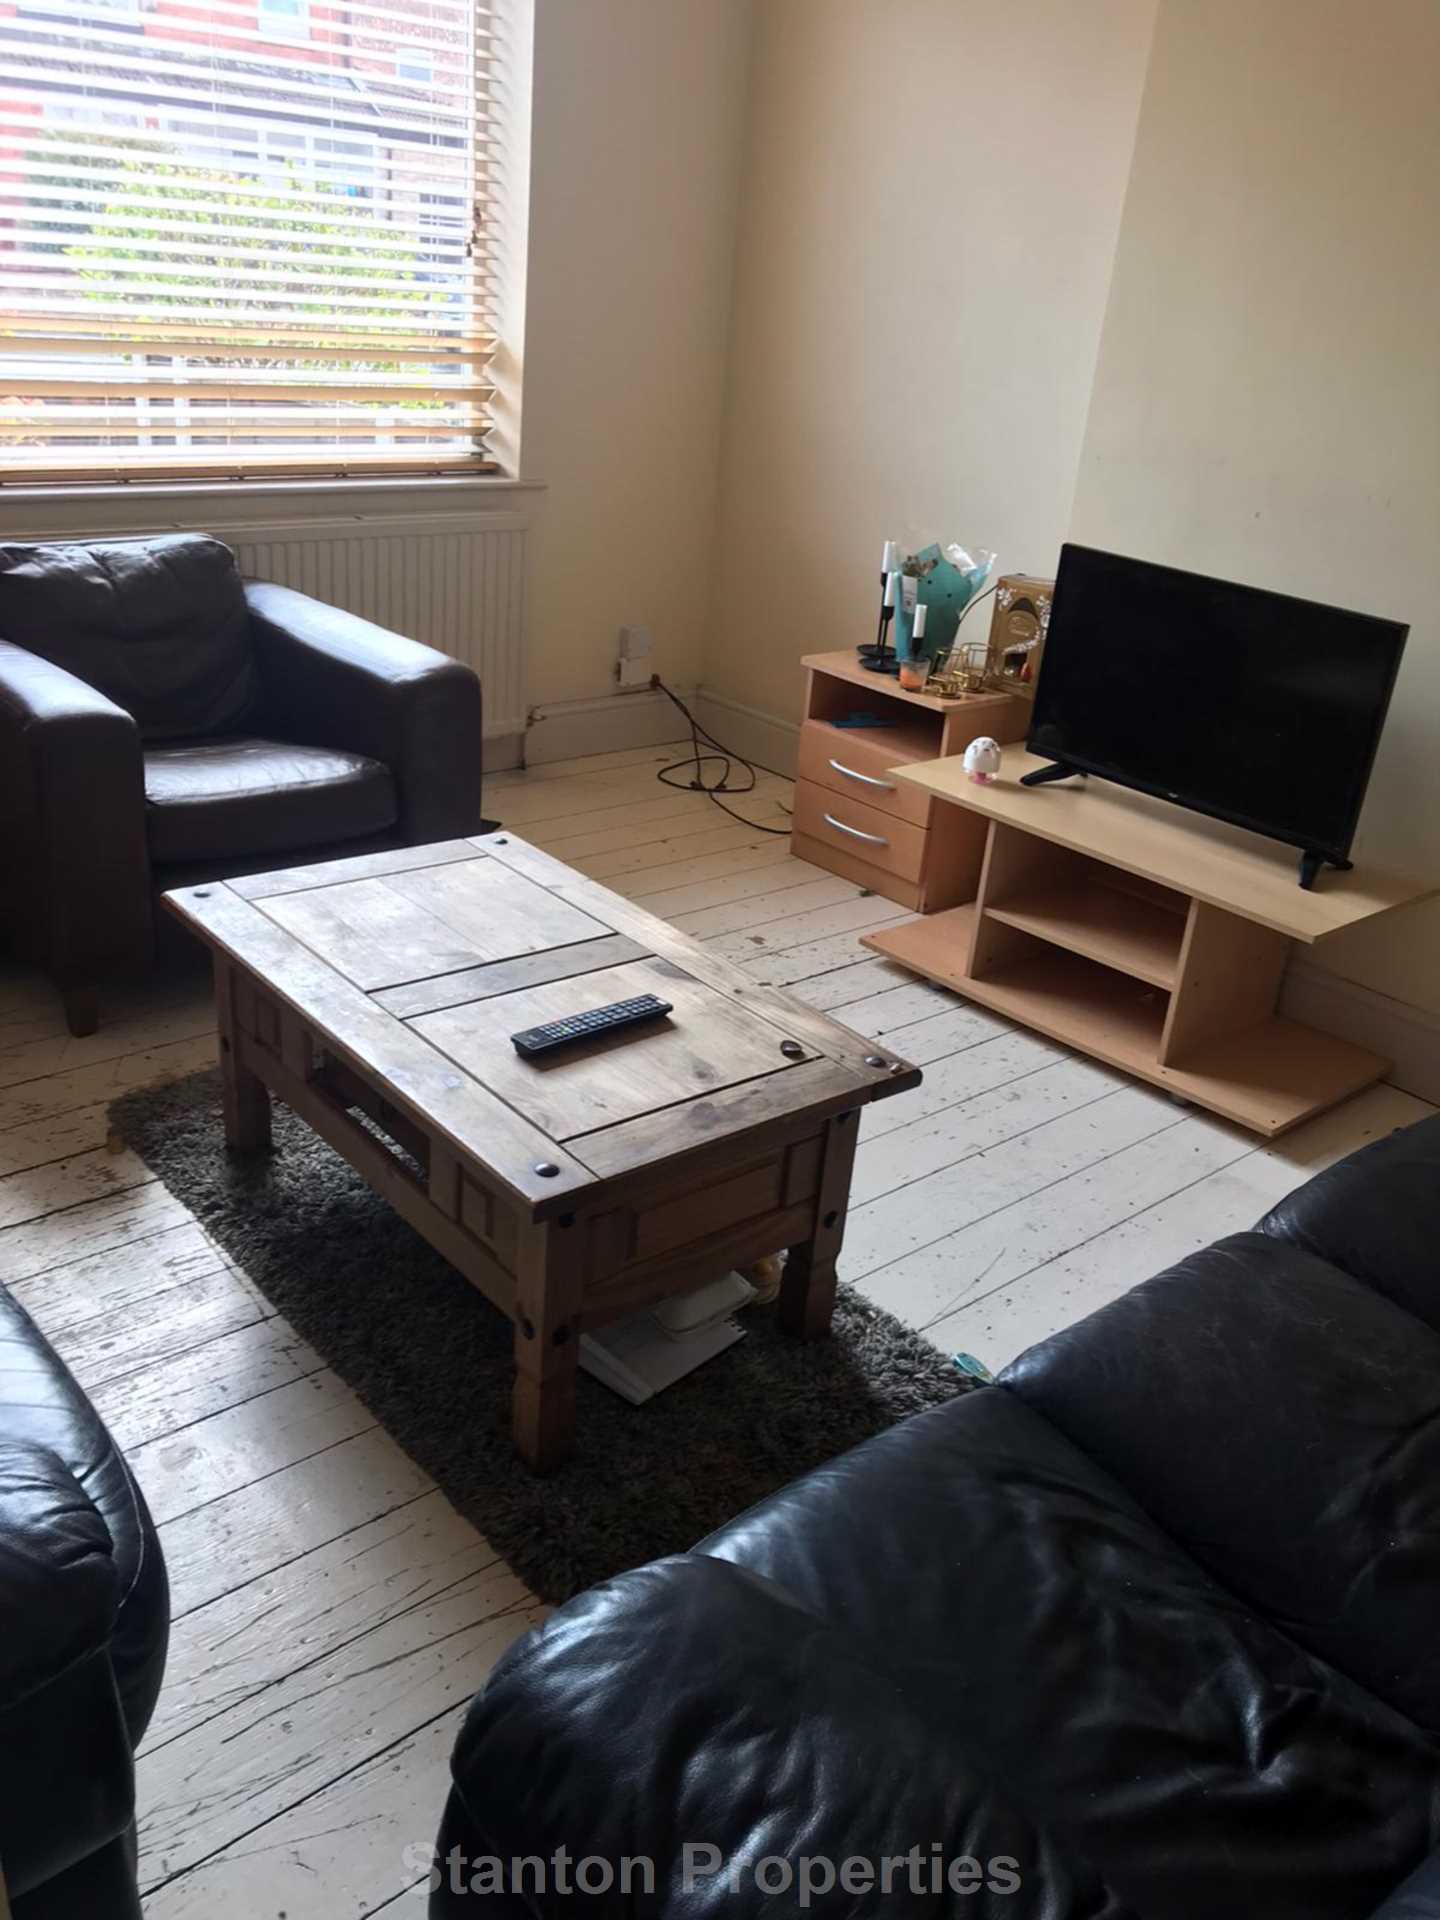 VIDEO TOUR AVAILABLE, £100 pppw, Finchley Road, Fallowfield, Image 2